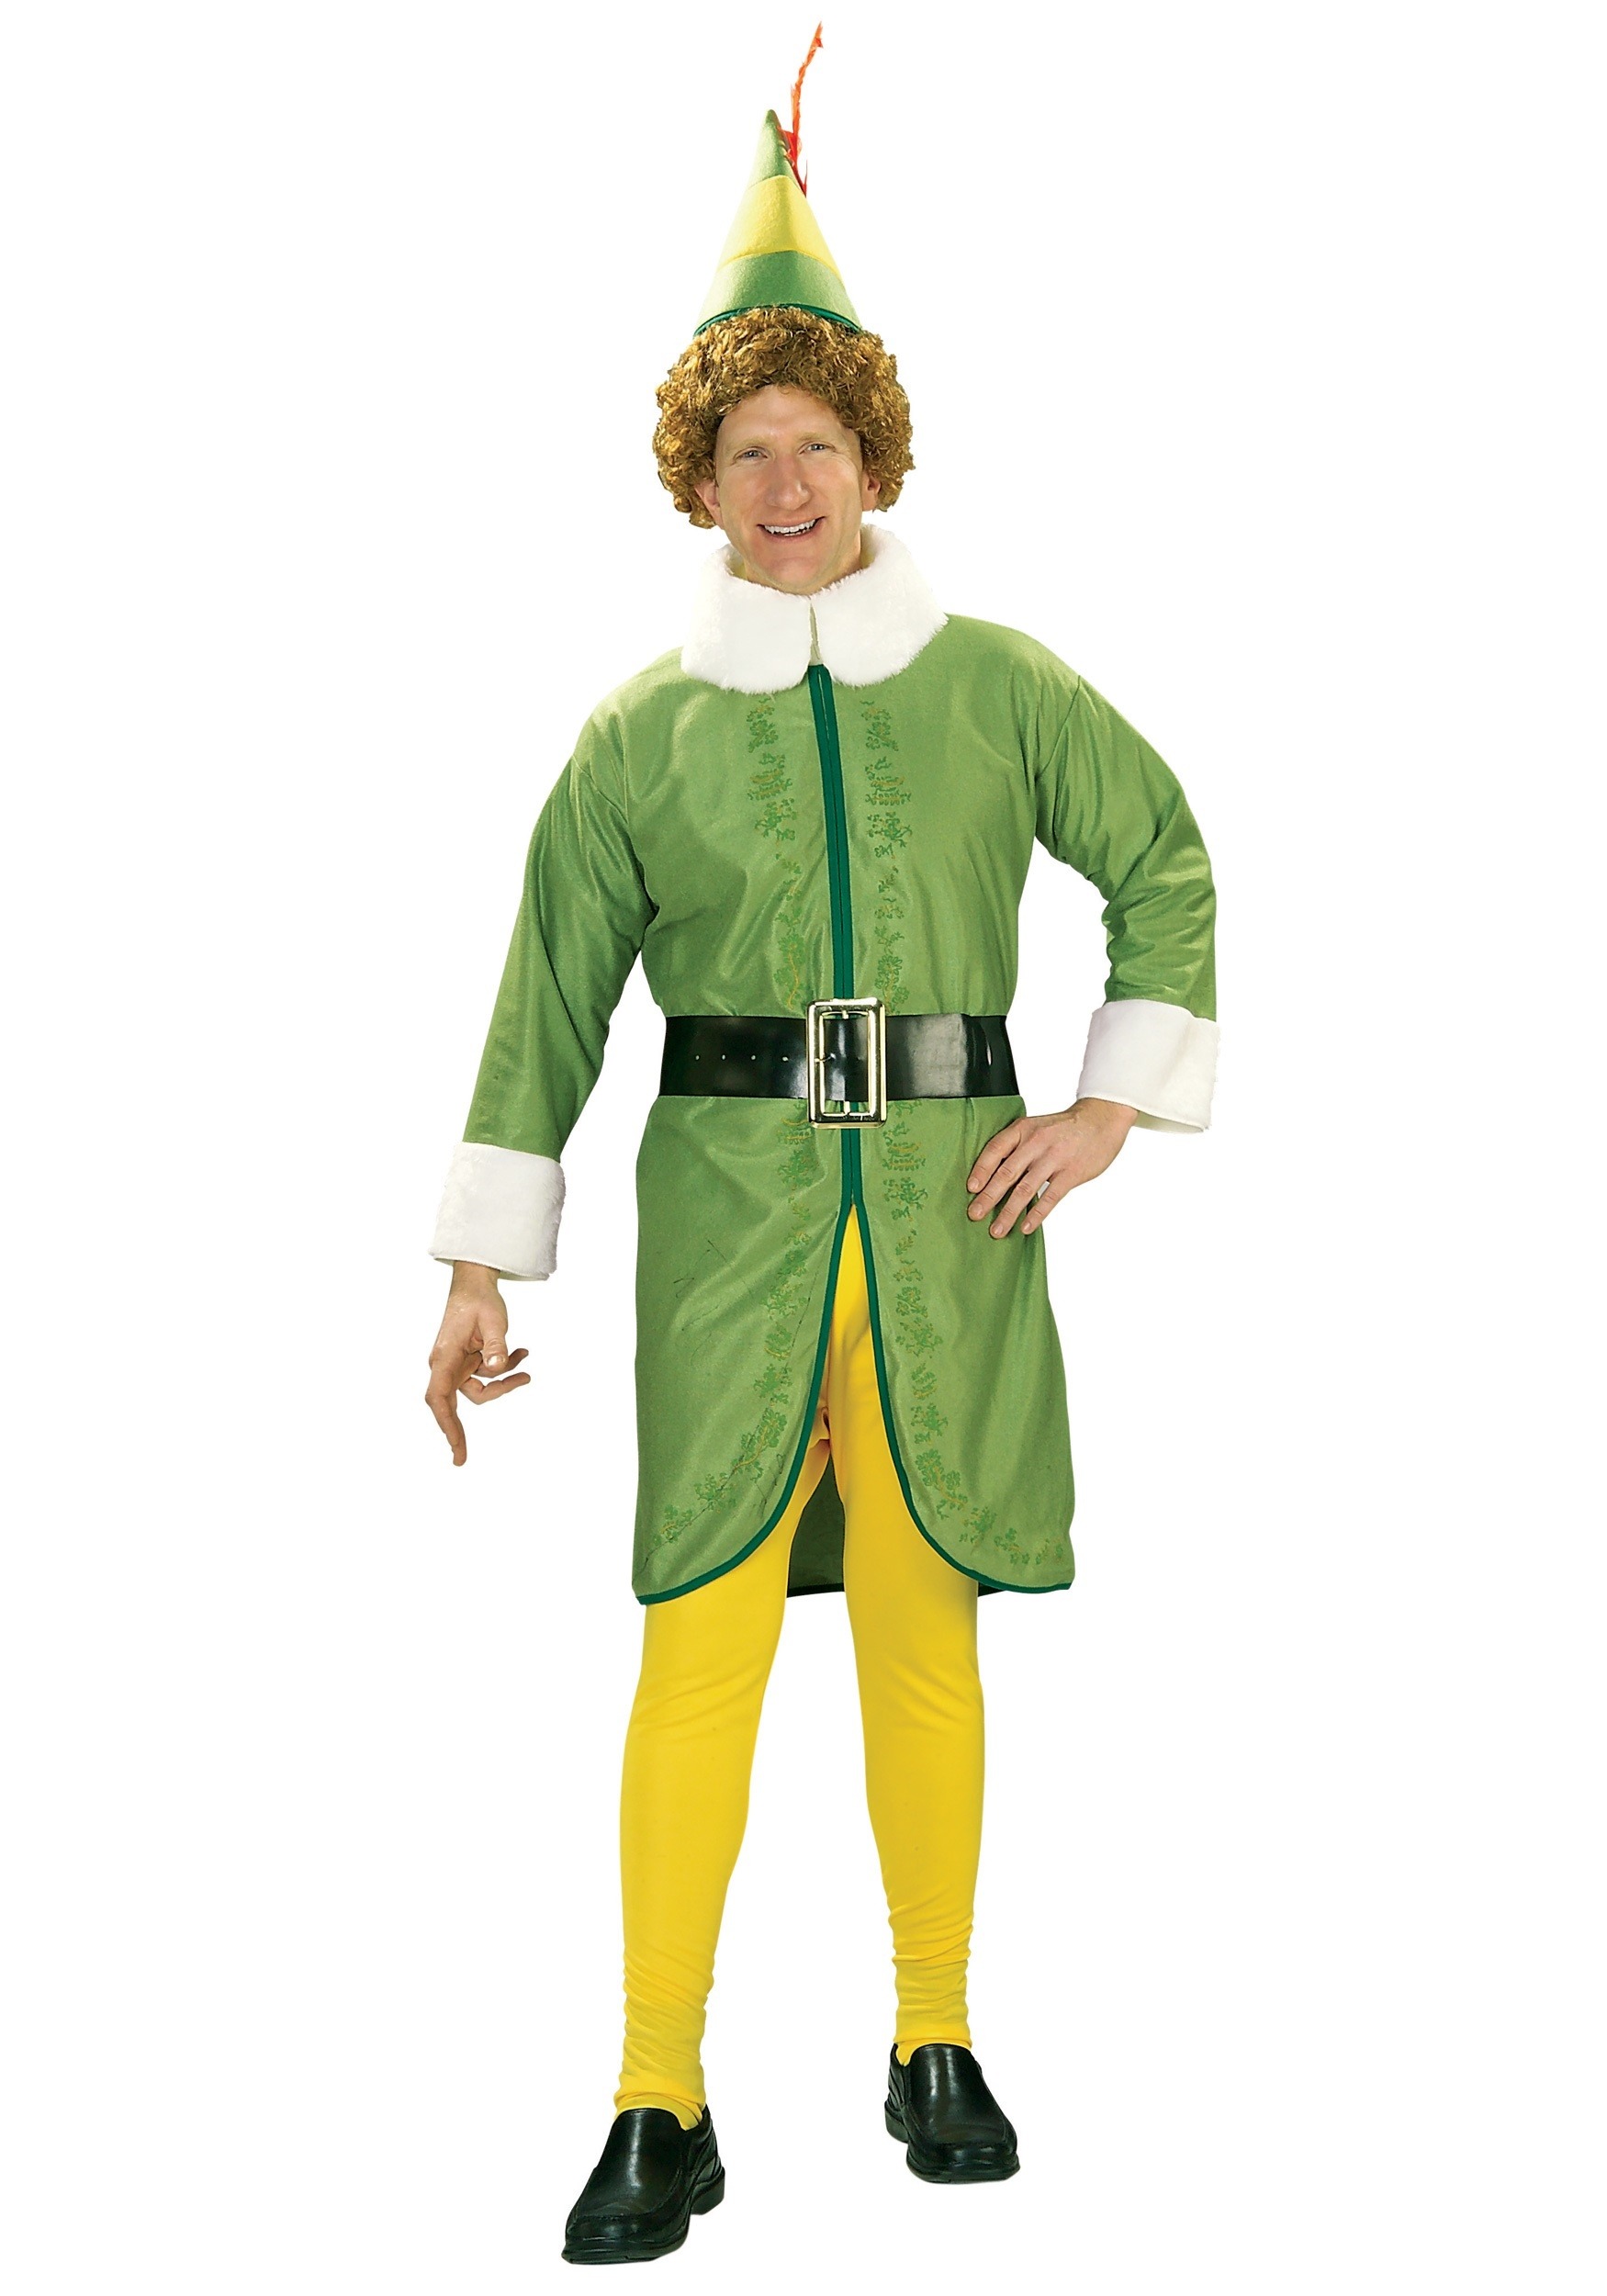 Image of Buddy the Elf Costume for Adults ID RU880419-XL